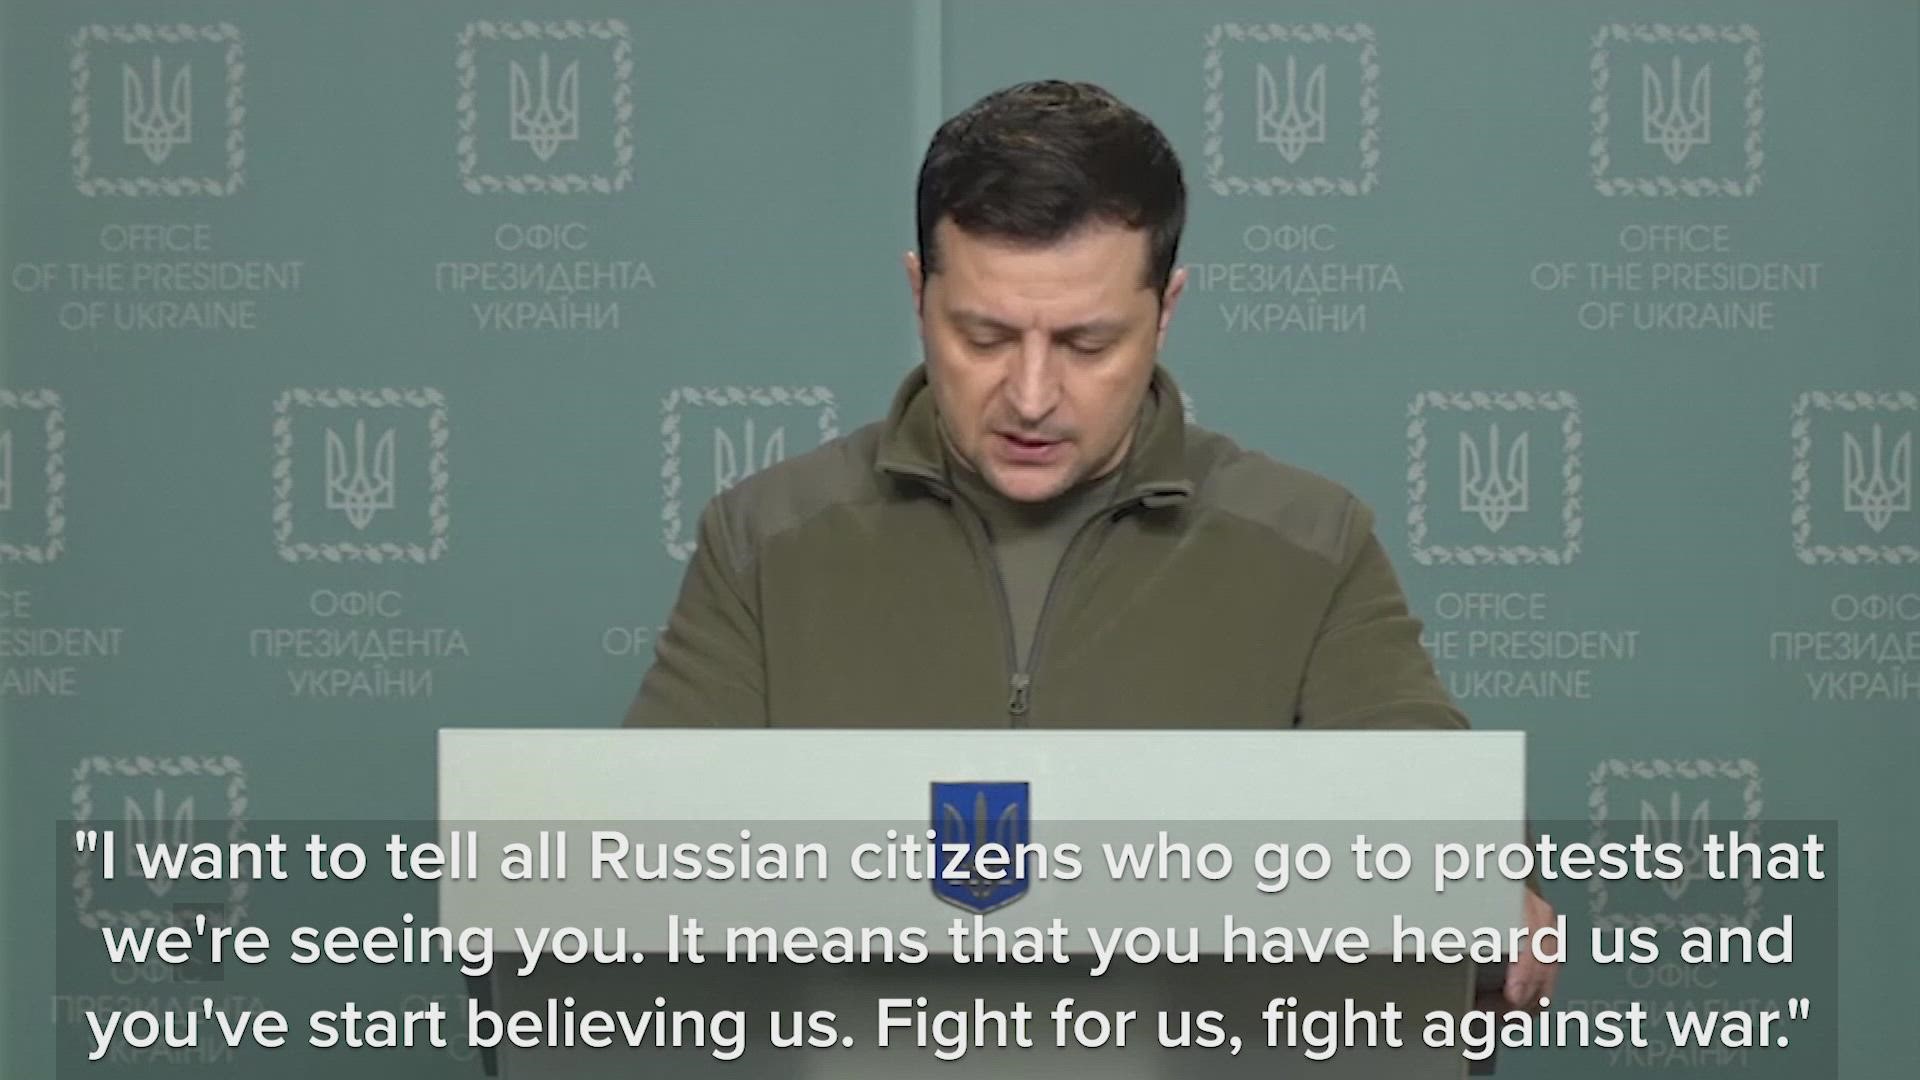 Ukrainian president Volodymyr Zelenskyy thanked protesters in Russia who are speaking out against the invasion of his country by Russian forces.